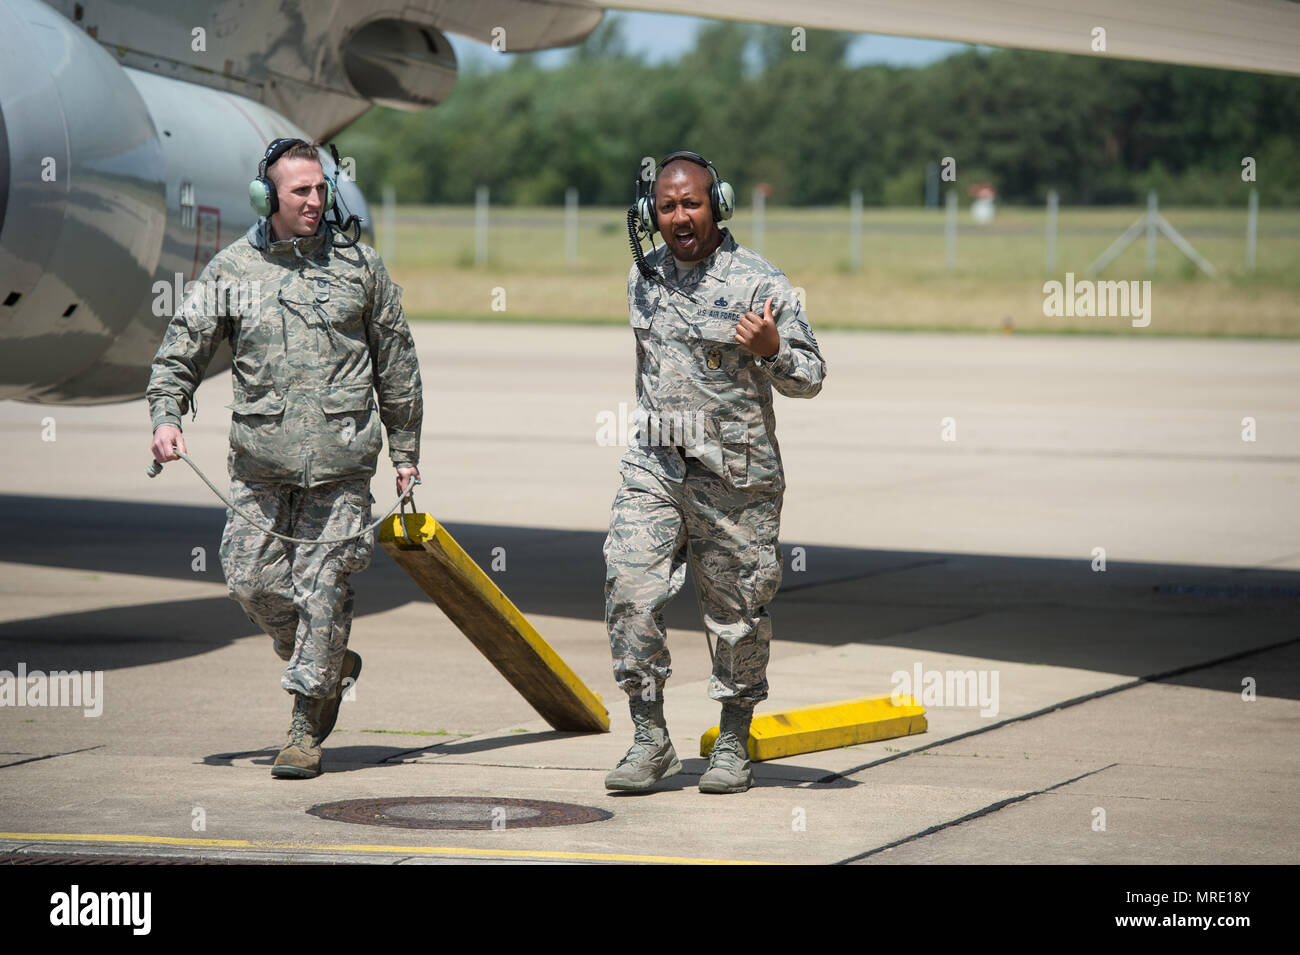 Tech. Sgt. Jordan Wright and Senior Master Sgt. Alphonzo Glover, both maintenance Reservists from the 513th Air Control Group, pull chocks from an E-3 Sentry Airborne Warning and Control System aircraft on June 7, 2017, at NATO Air Base Geilenkirchen, Germany, prior to a mission in support of BALTOPS 2017. Both Airmen are a part of the nearly 100 Reservists supporting the BALTOPS 2017 exercise, which involves 50 ships and submarines and 40 aircraft from 14 member nations. (U.S. Air Force photo/2nd Lt. Caleb Wanzer) Stock Photo